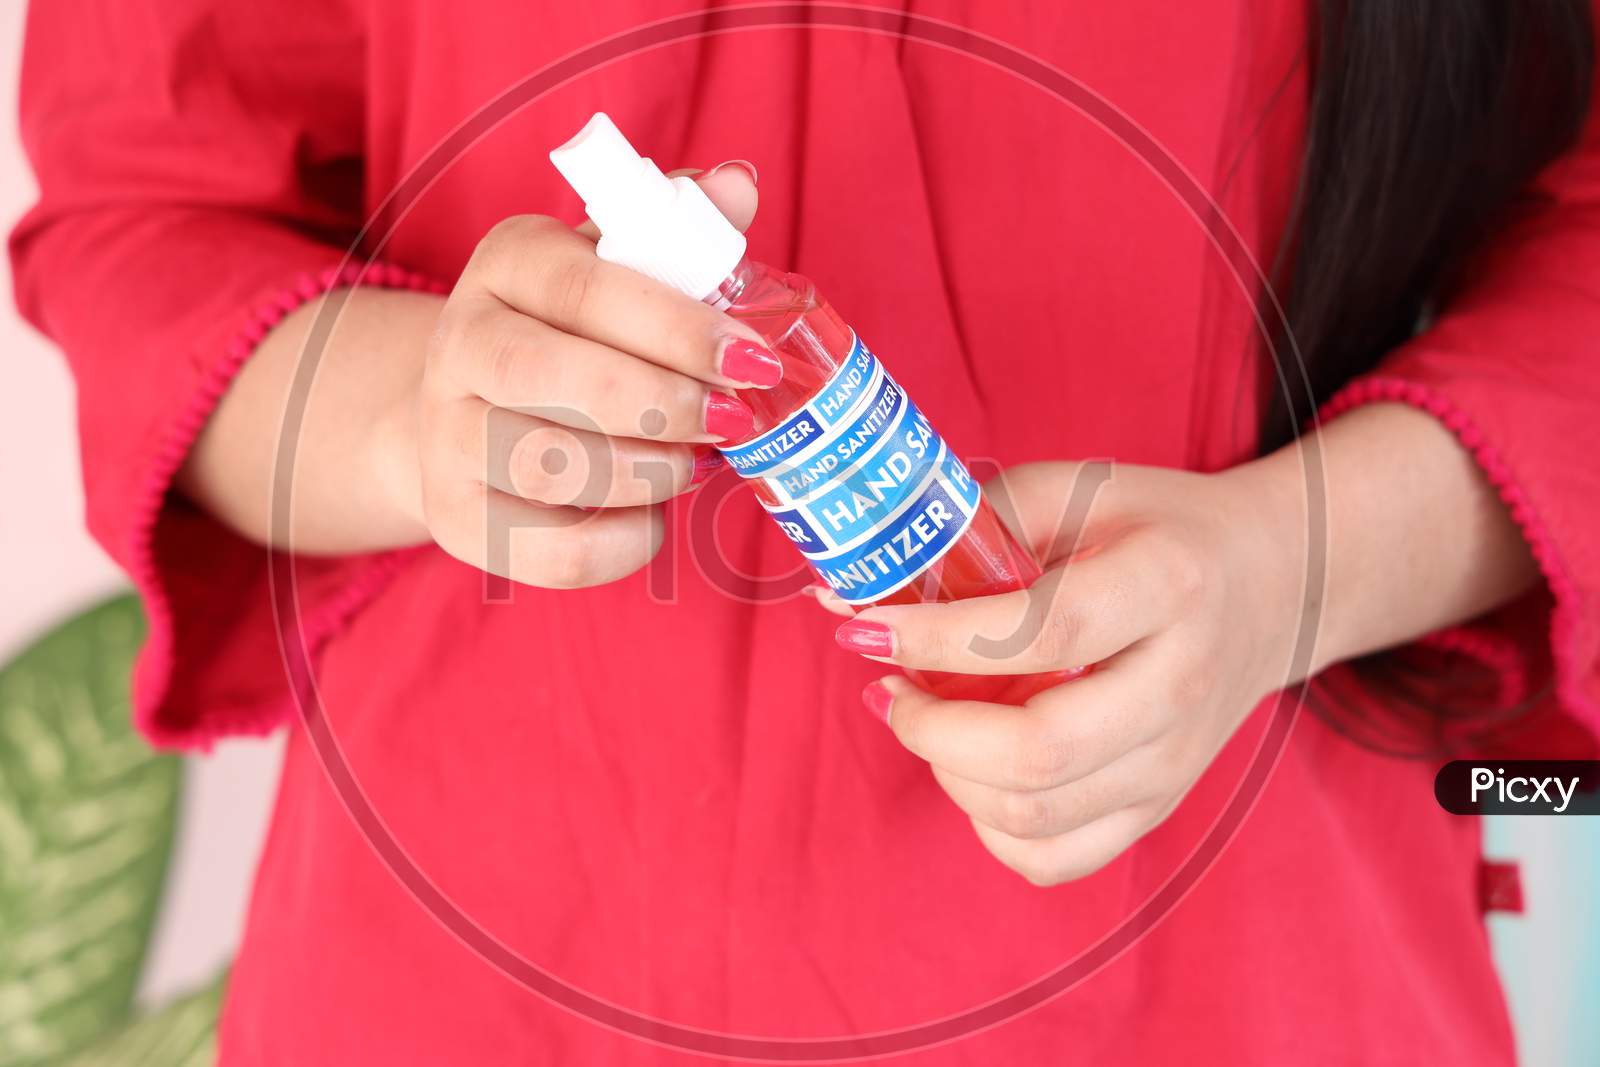 Young girl holding hand sanitizing liquid bottle to sanitize her hands